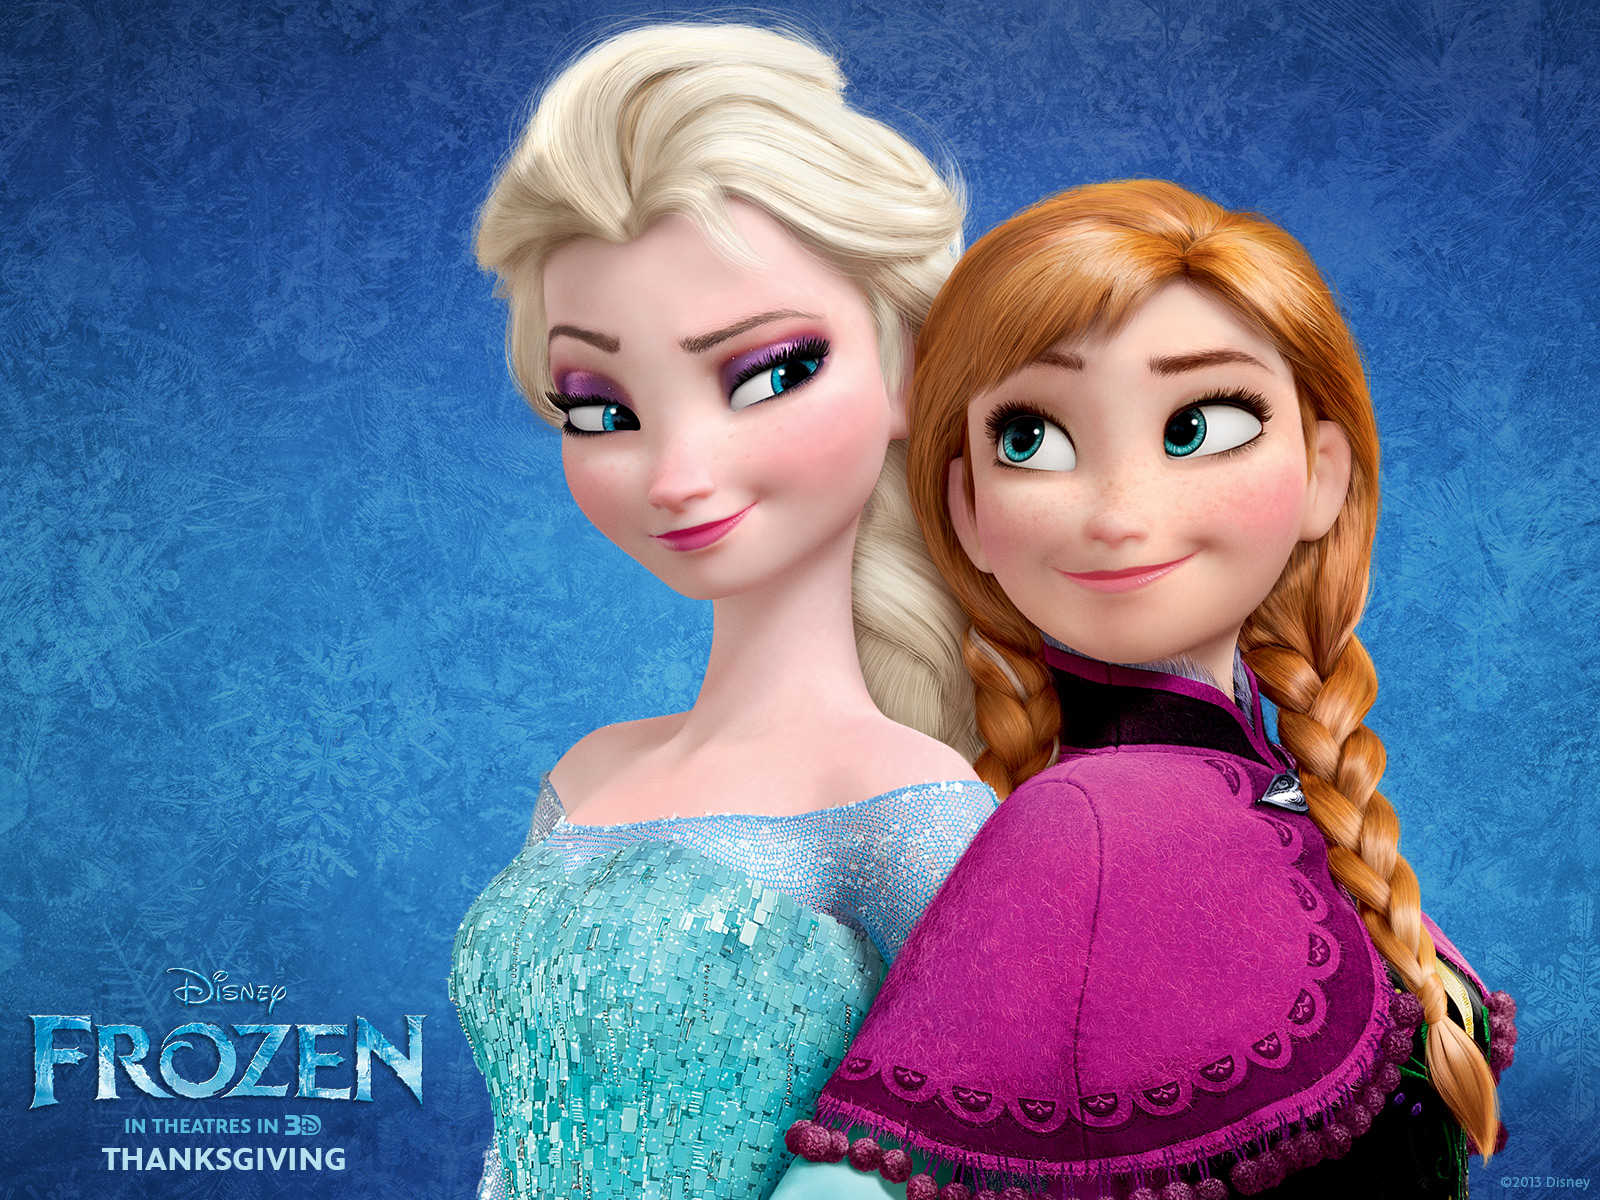 Like or share Frozen Elsa And Anna Wallpapers on Facebook 1600x1200